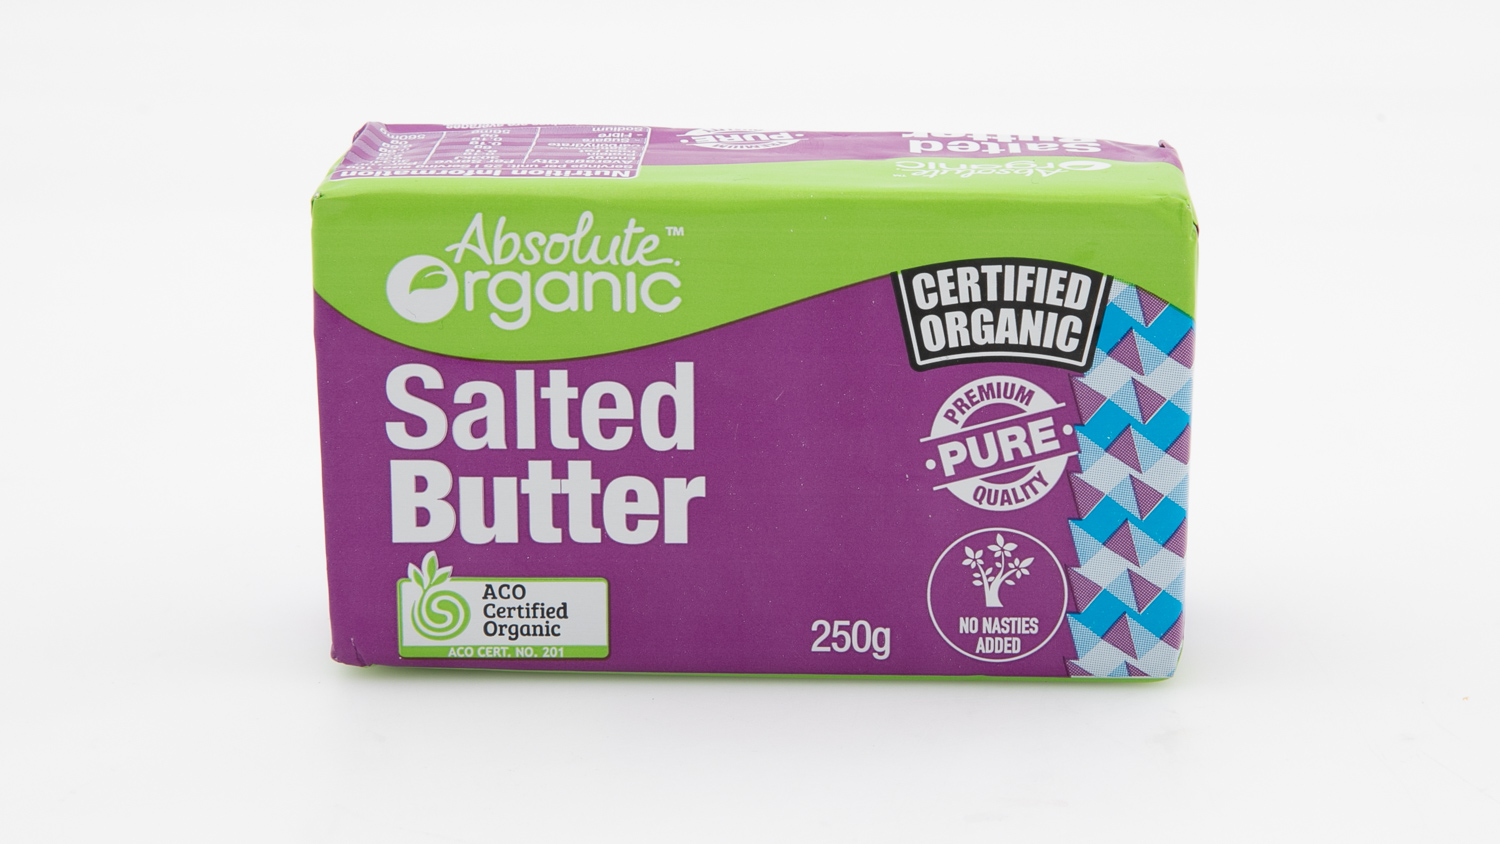 Absolute Organic Salted Butter carousel image